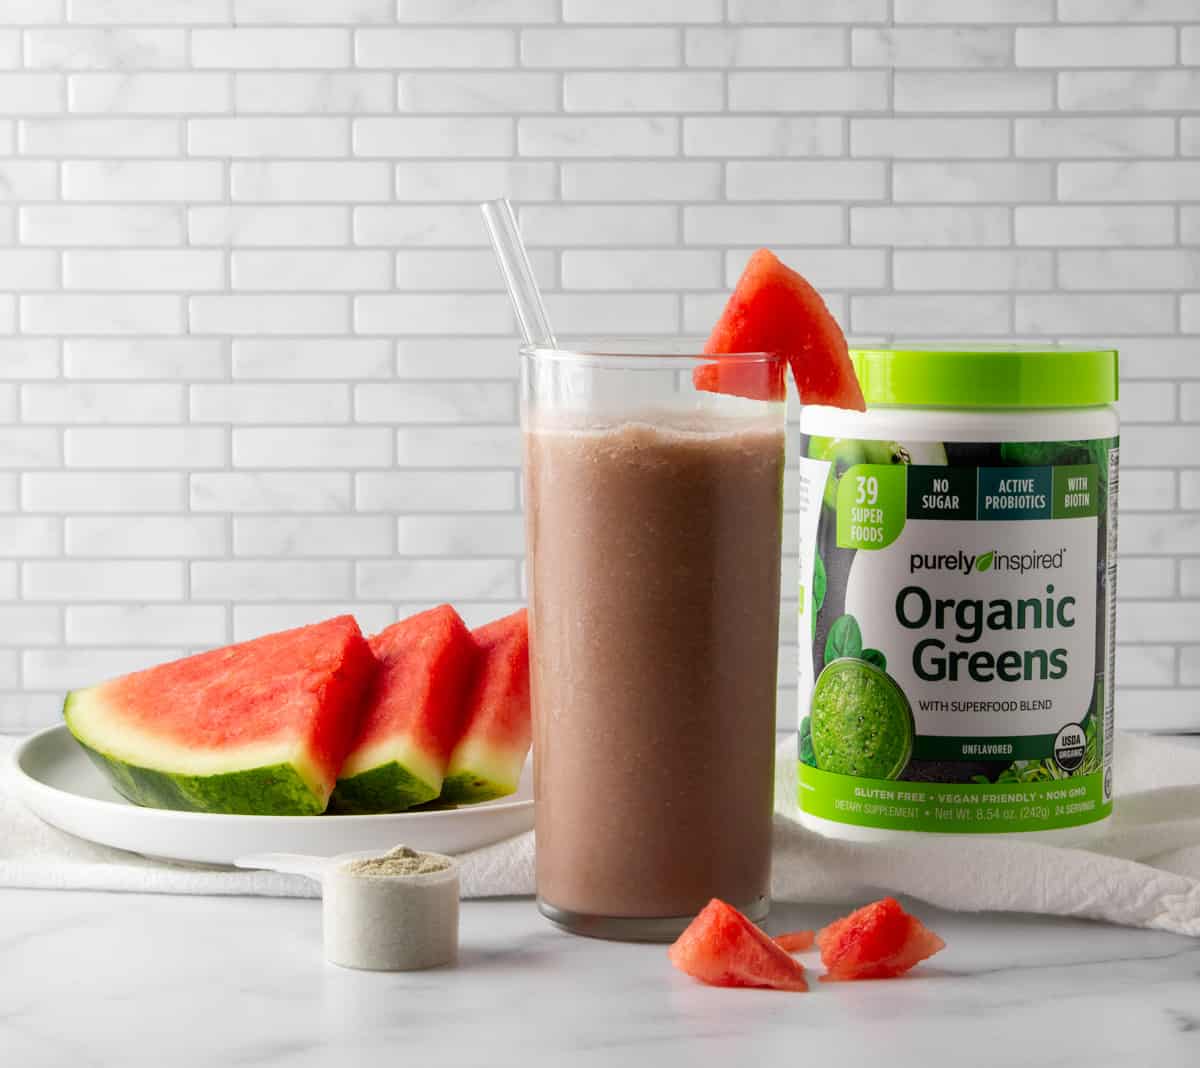 watermelon green drink next to a plate of watermelon slices and a container of green drink powder